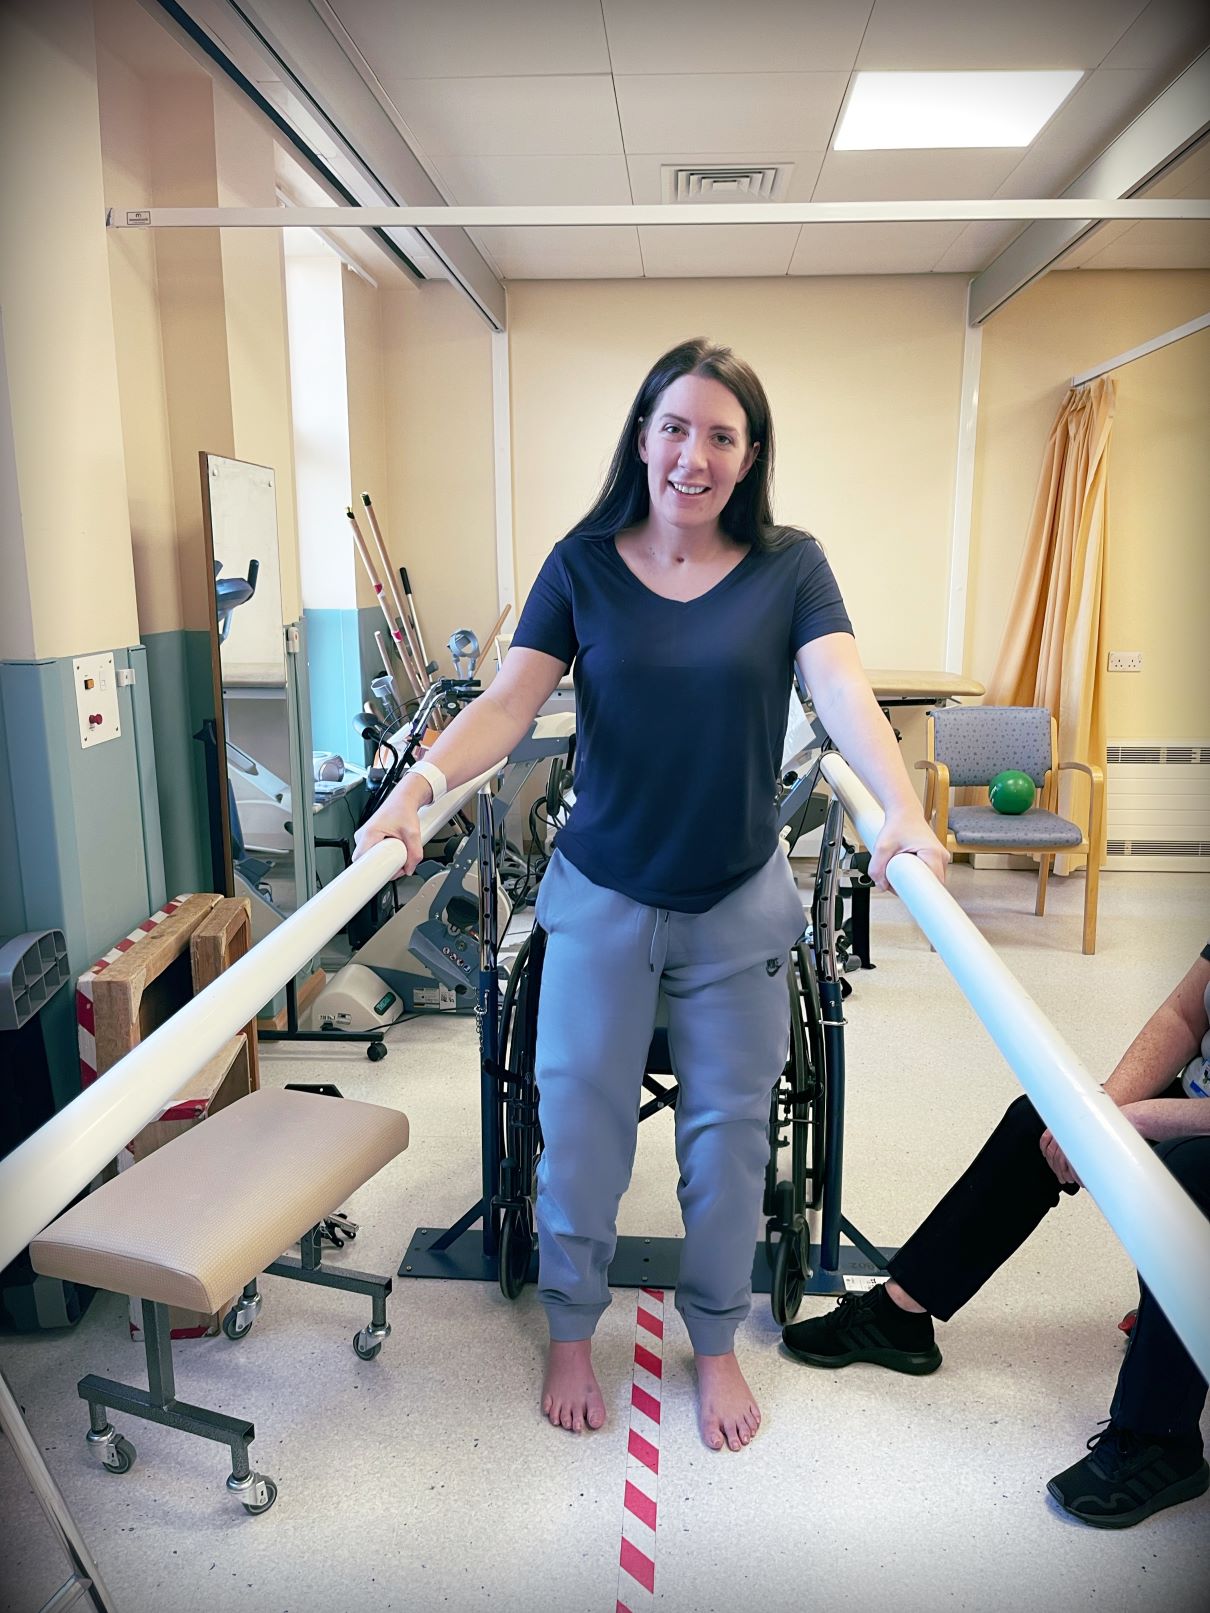 Emma Armstrong learning to walk again